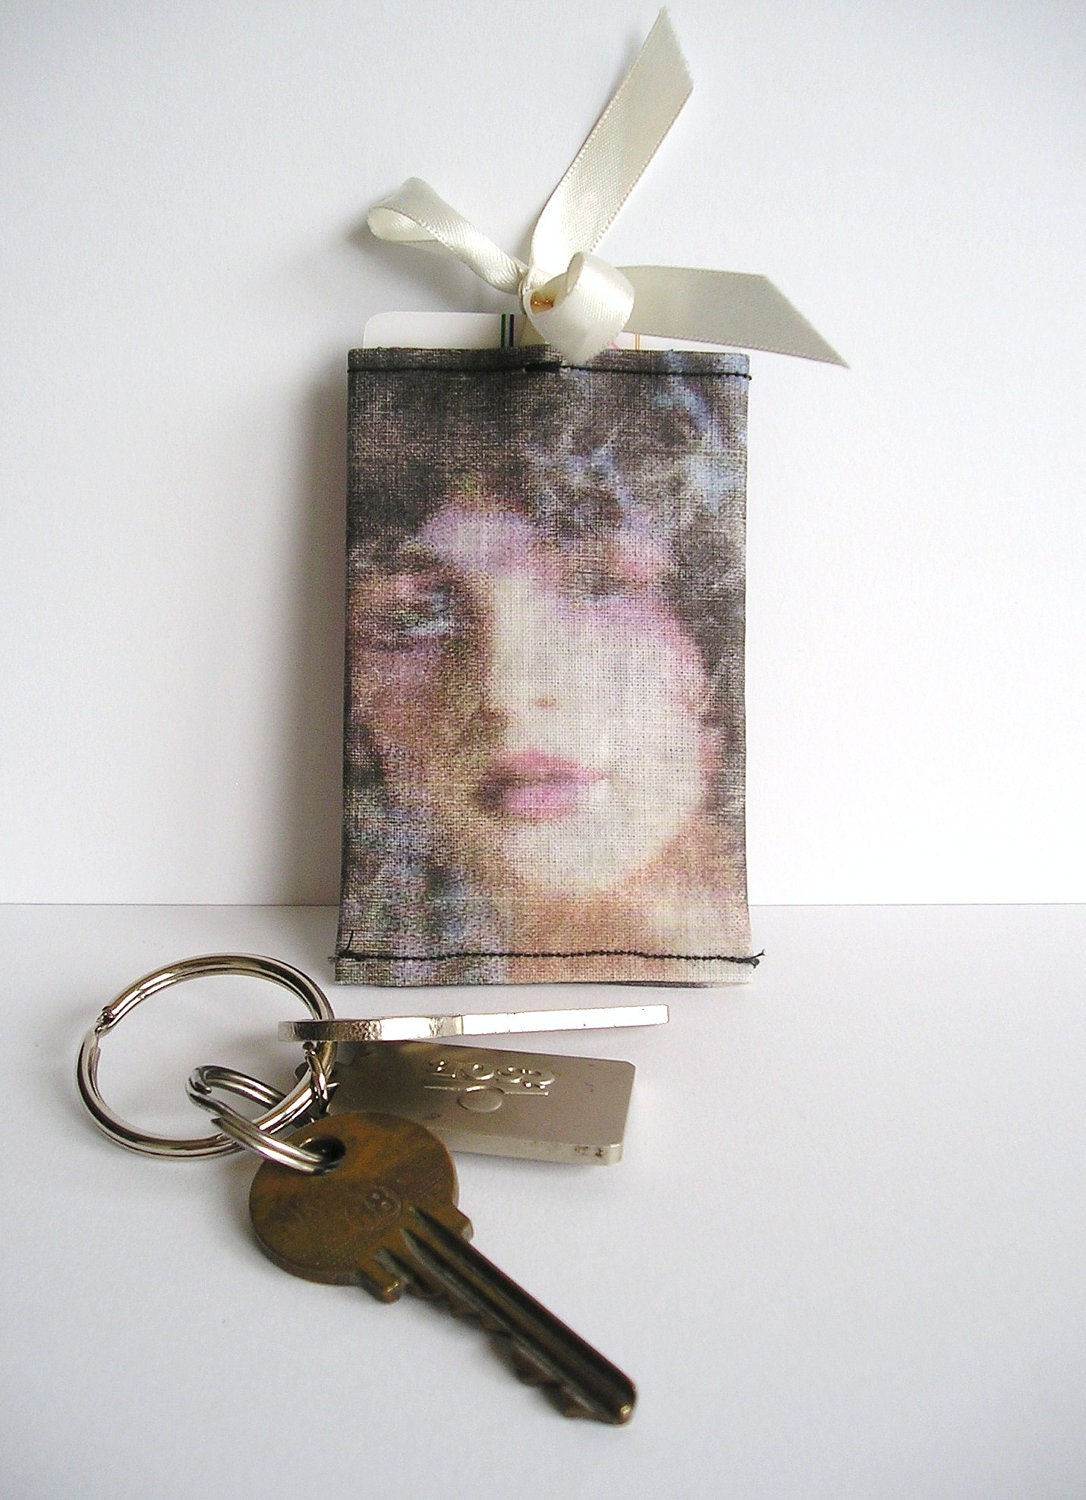 Card case - piece of art in your pocket / ID card / travel card / credit card / business card - CUTandTEAR